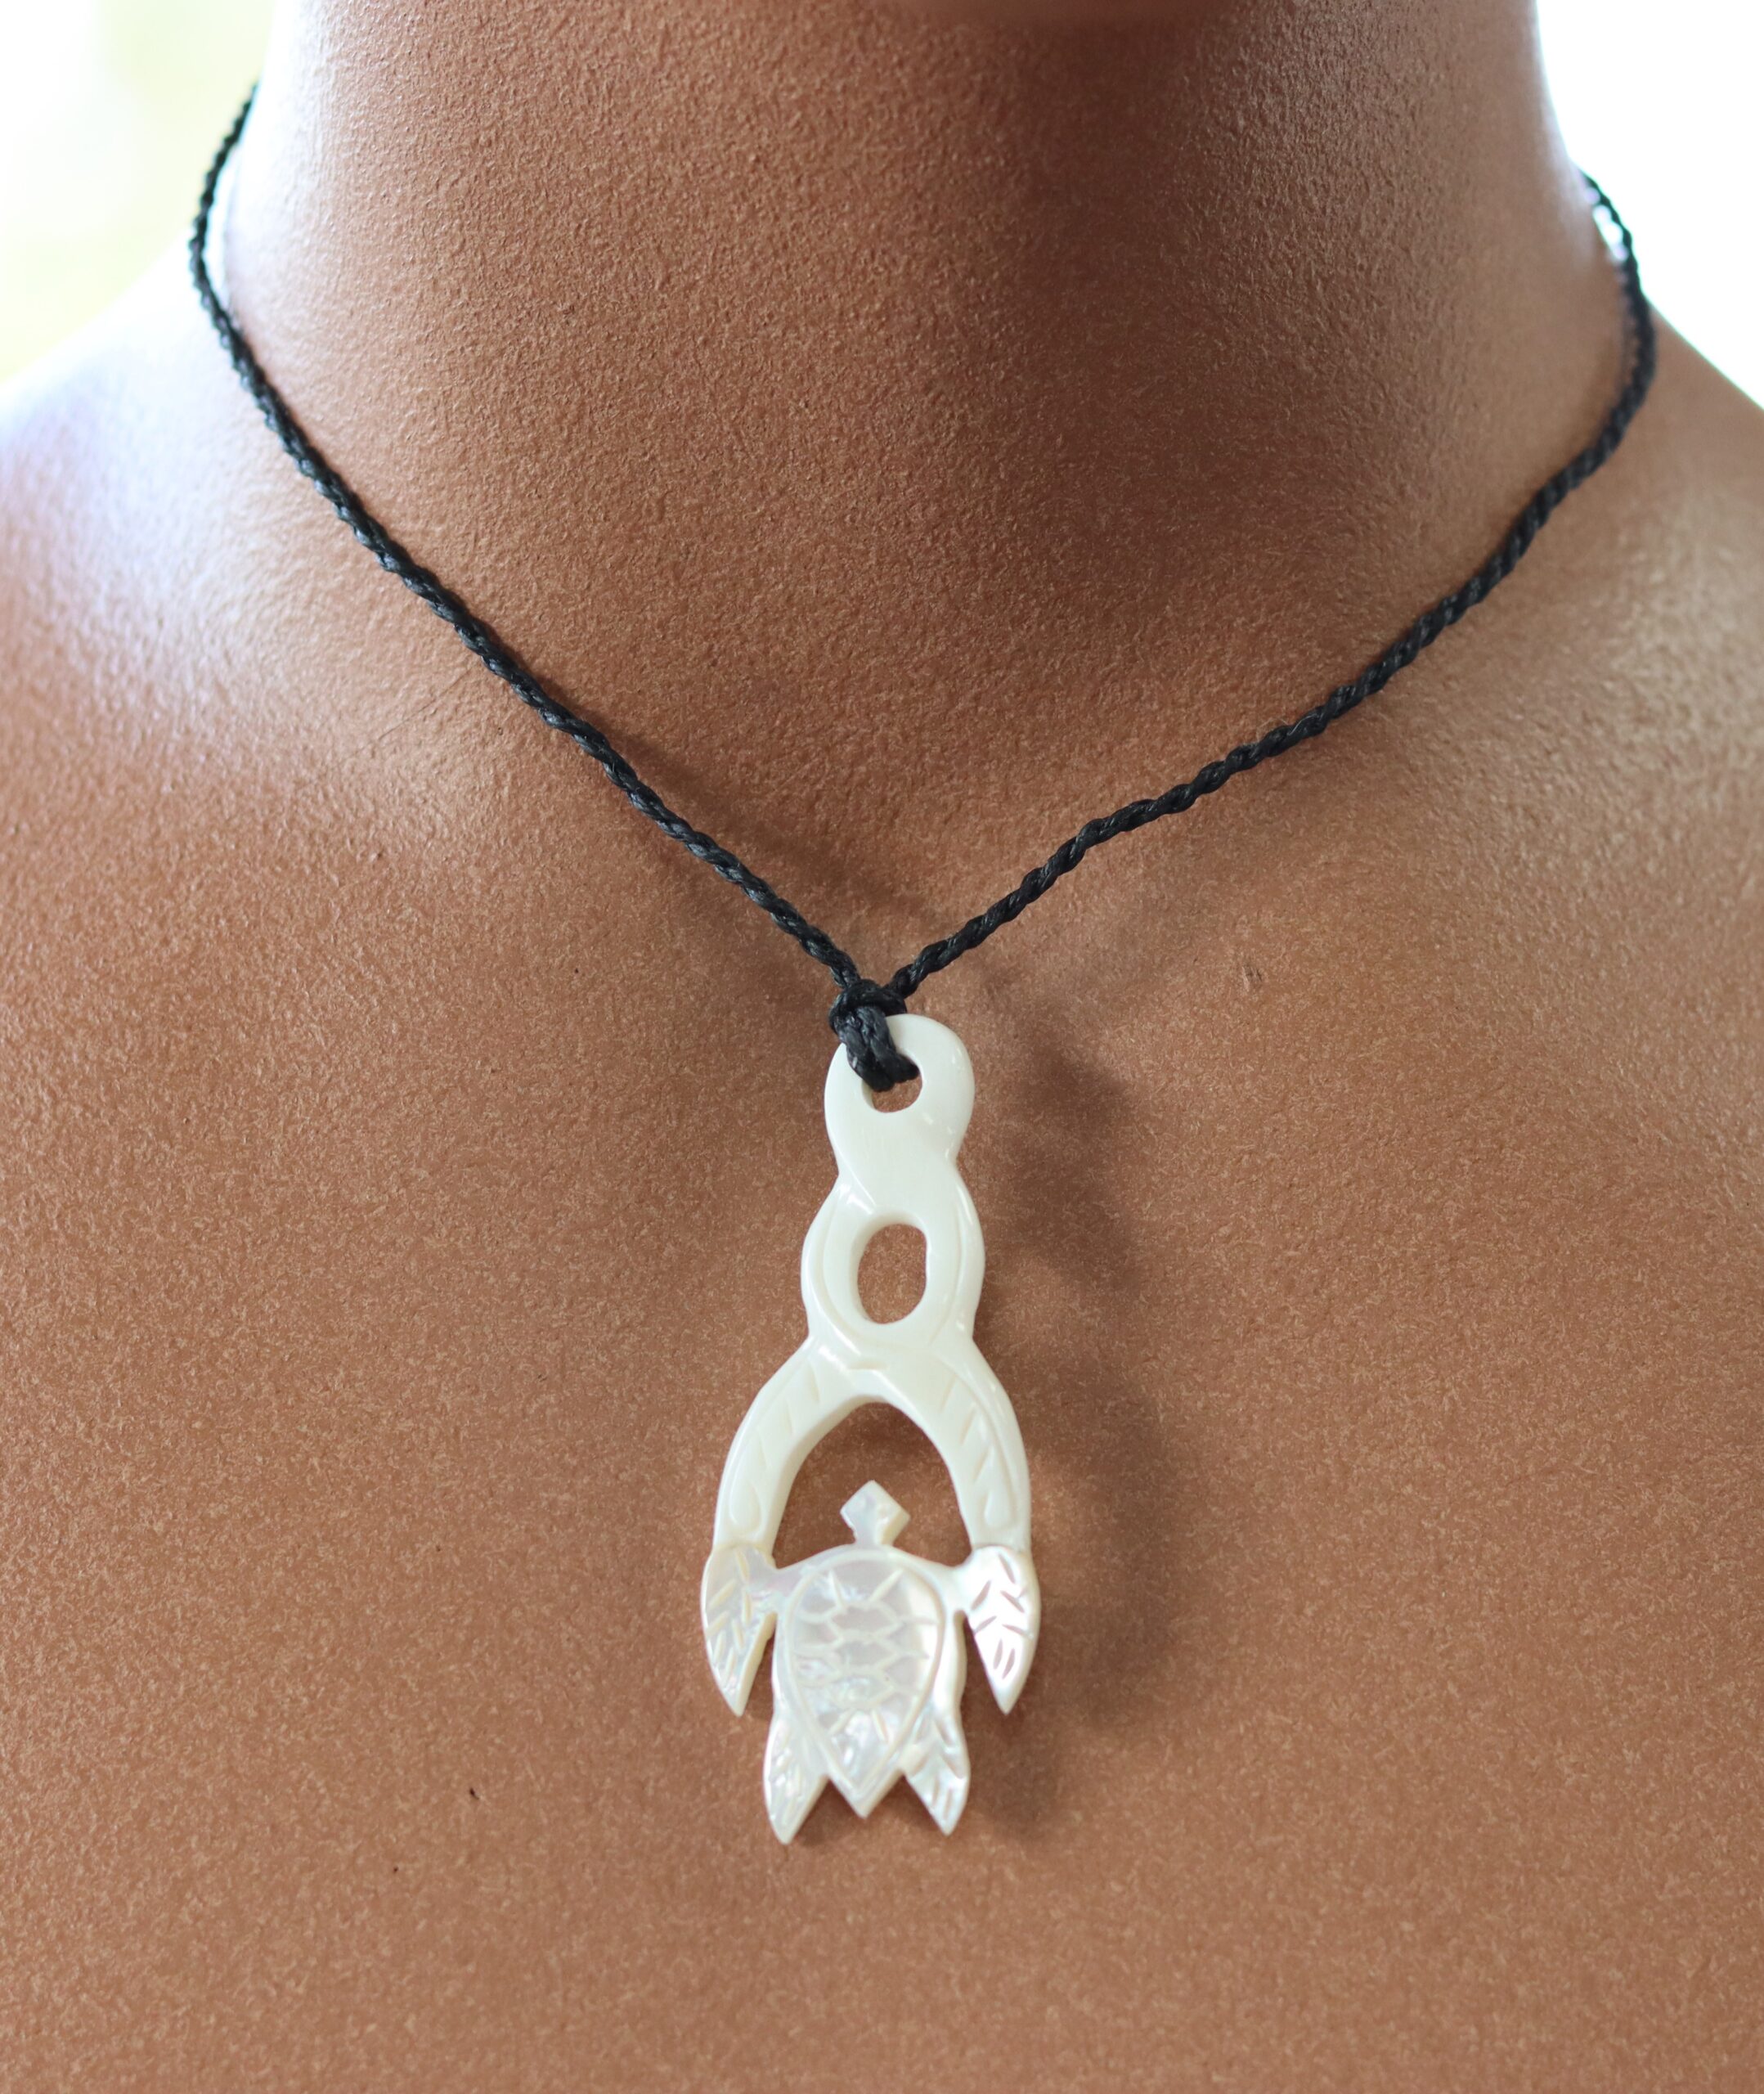 Imitation Yak Bone Carved Lucky Surfing Sea Turtles Wooden Pendant Necklace  Fashion For Men And Women From Charm_girls, $0.56 | DHgate.Com